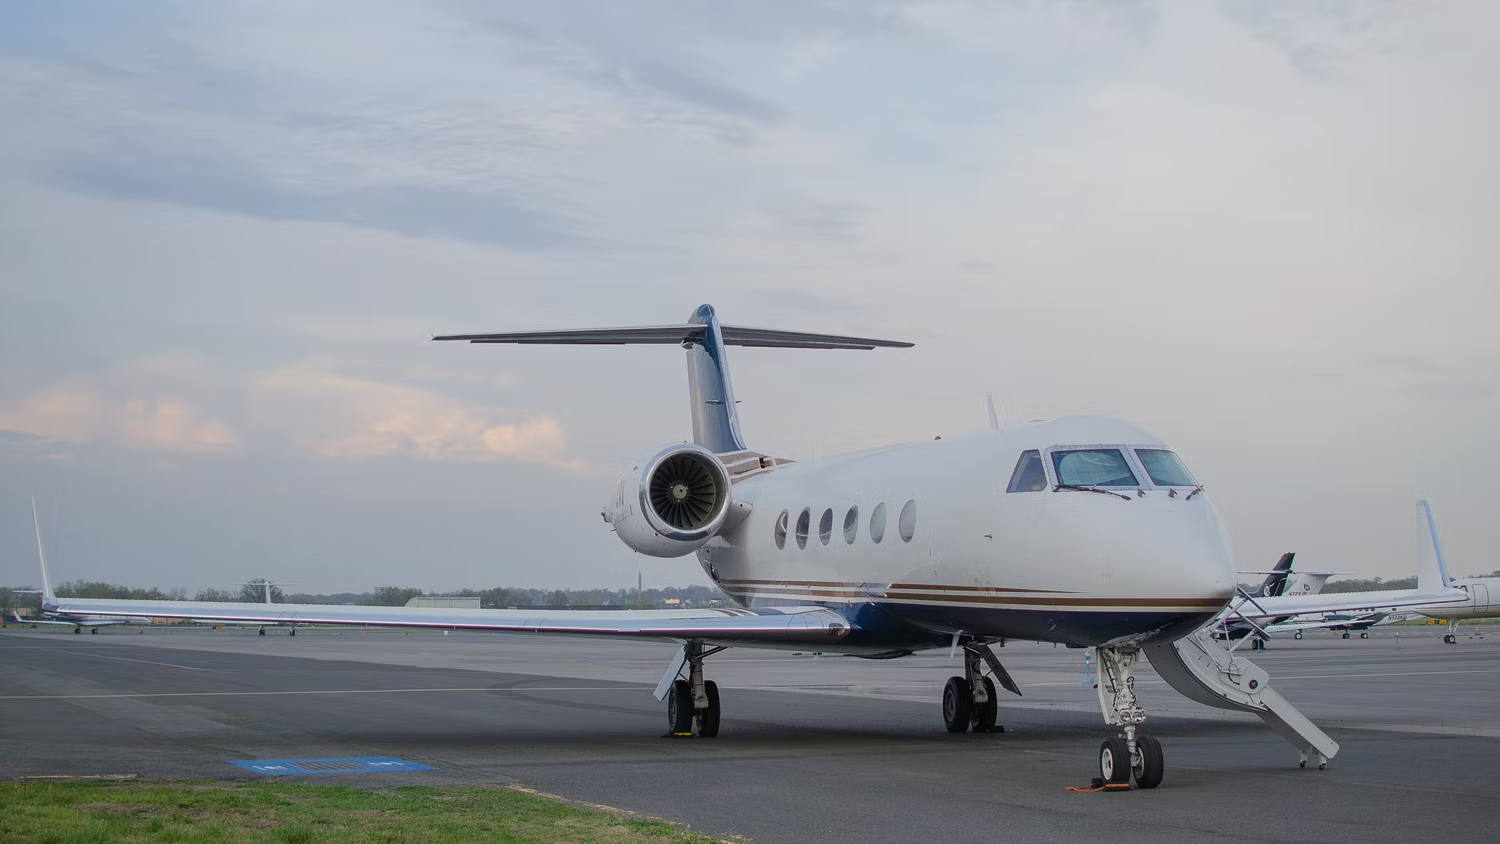 A Business Jet Parked At Teteboro Airport.